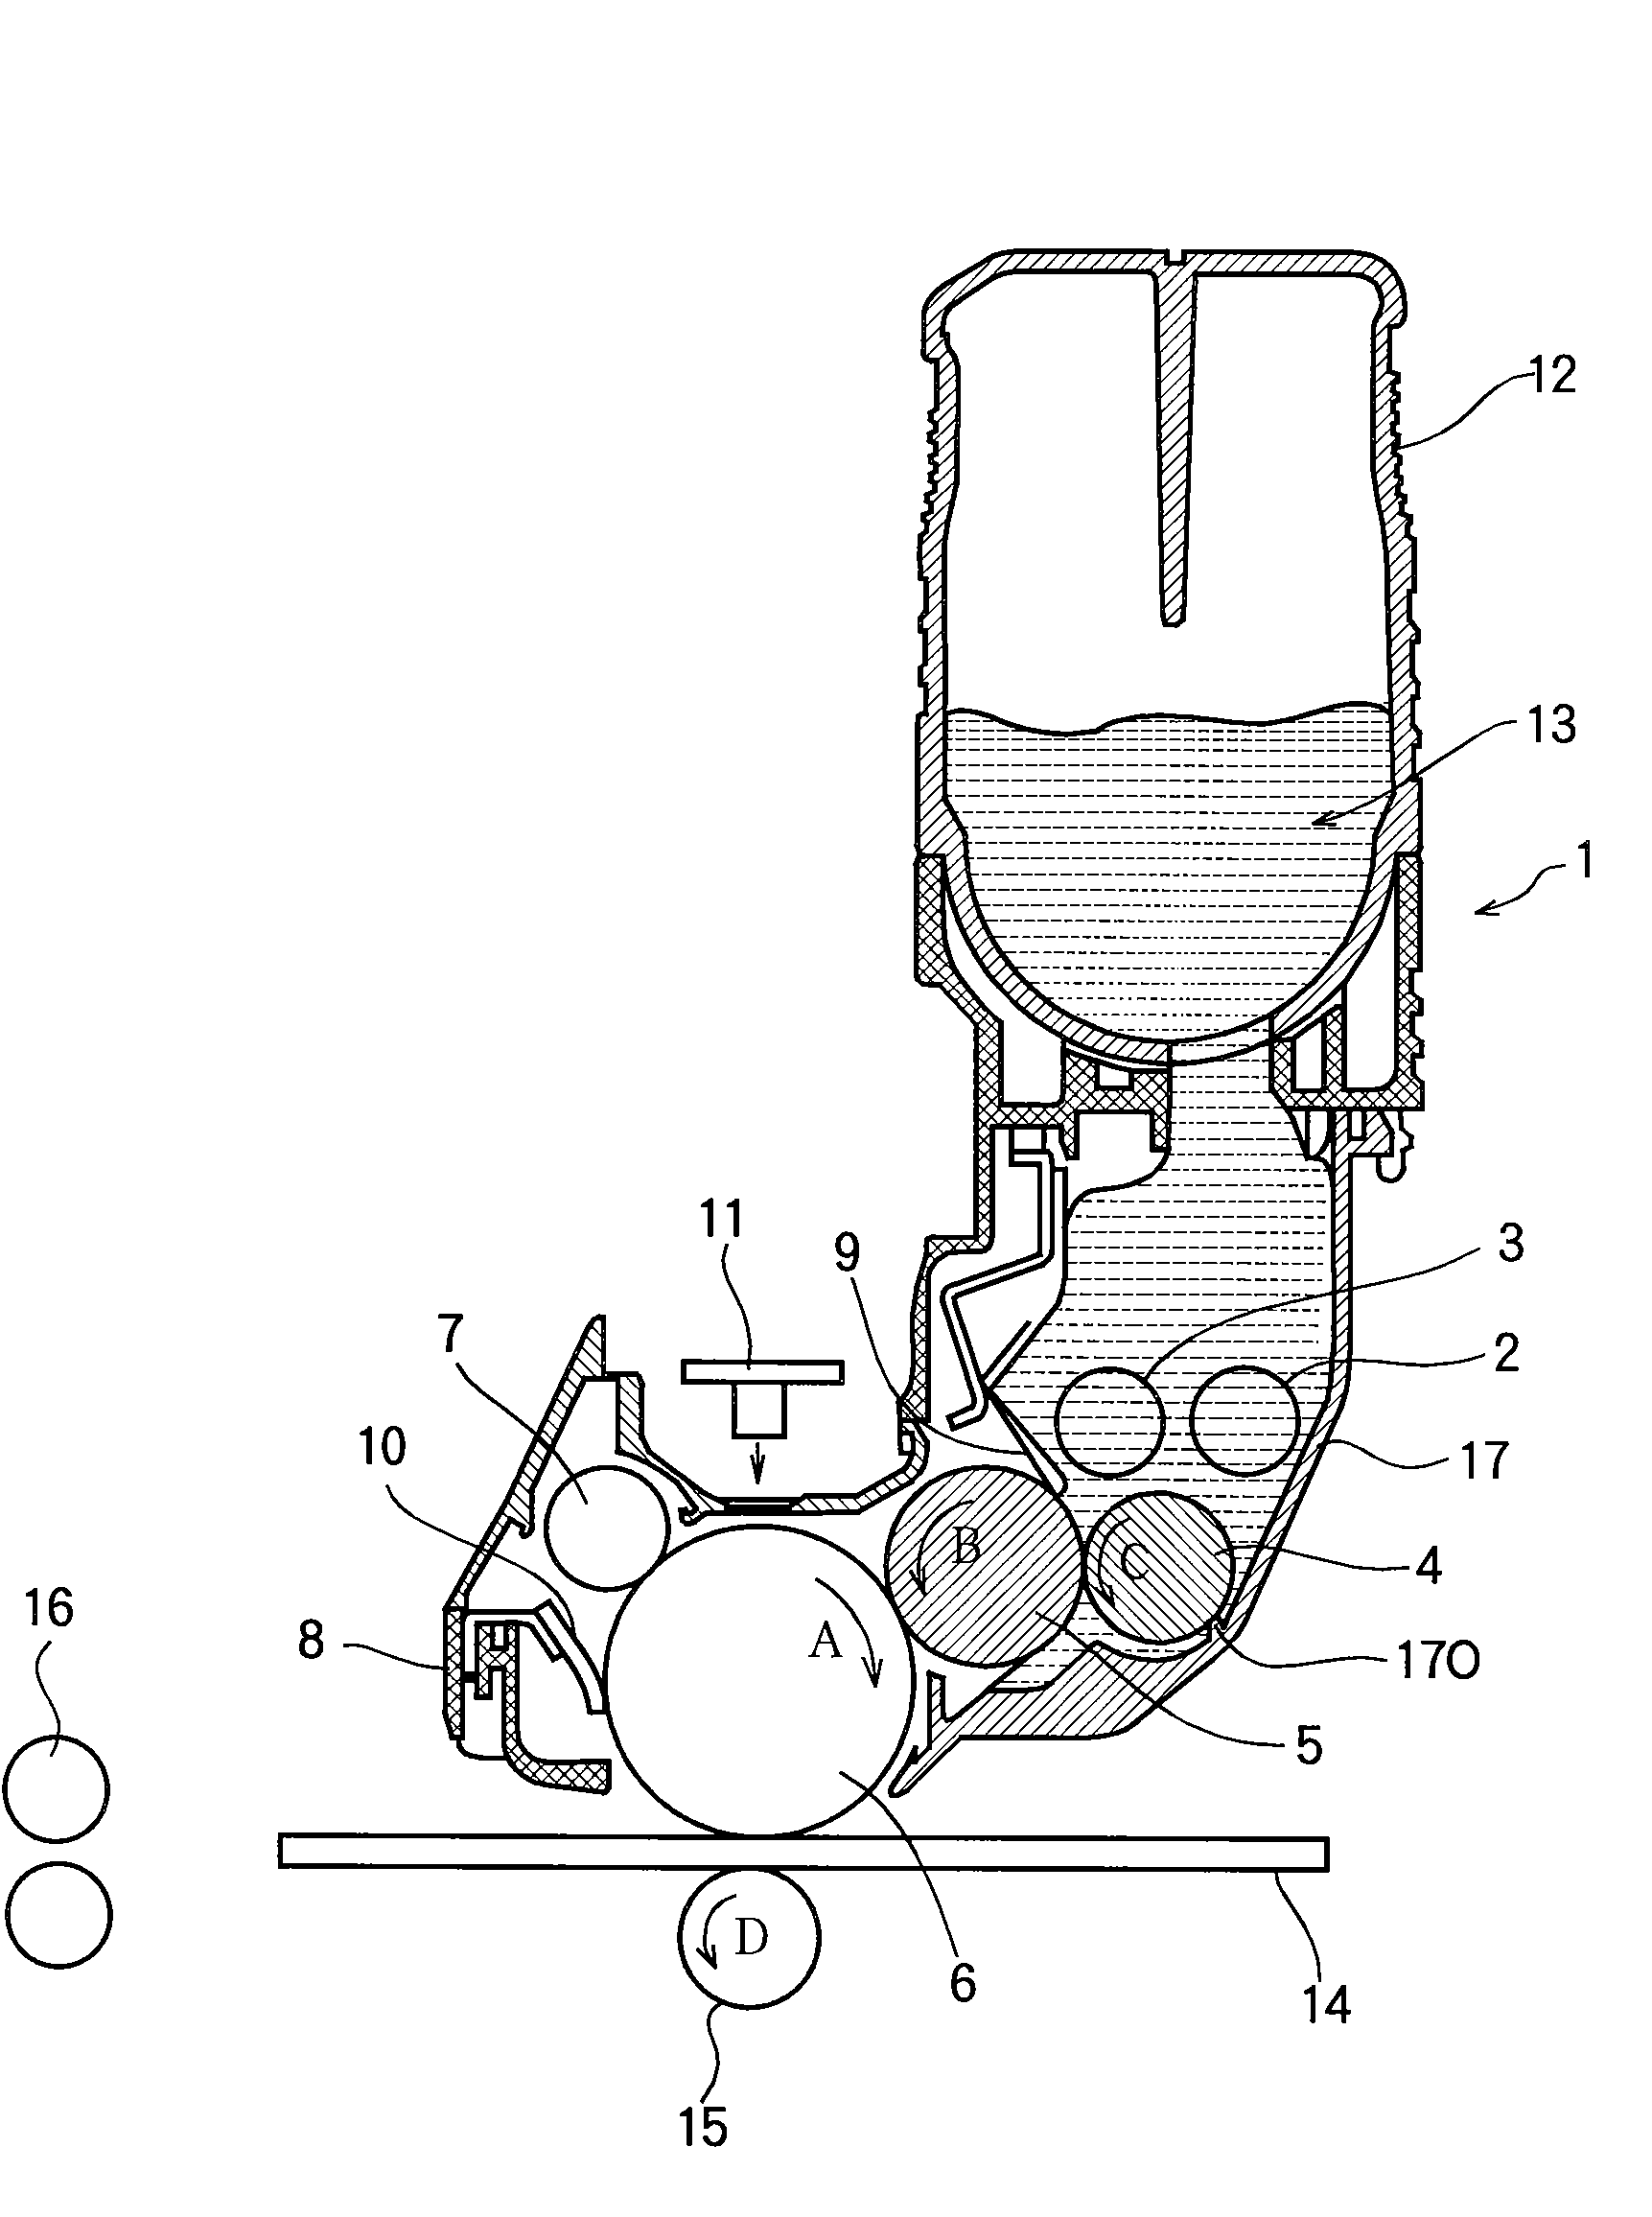 Developing Apparatus and Image Forming Apparatus that Incorporates the Developing Apparatus